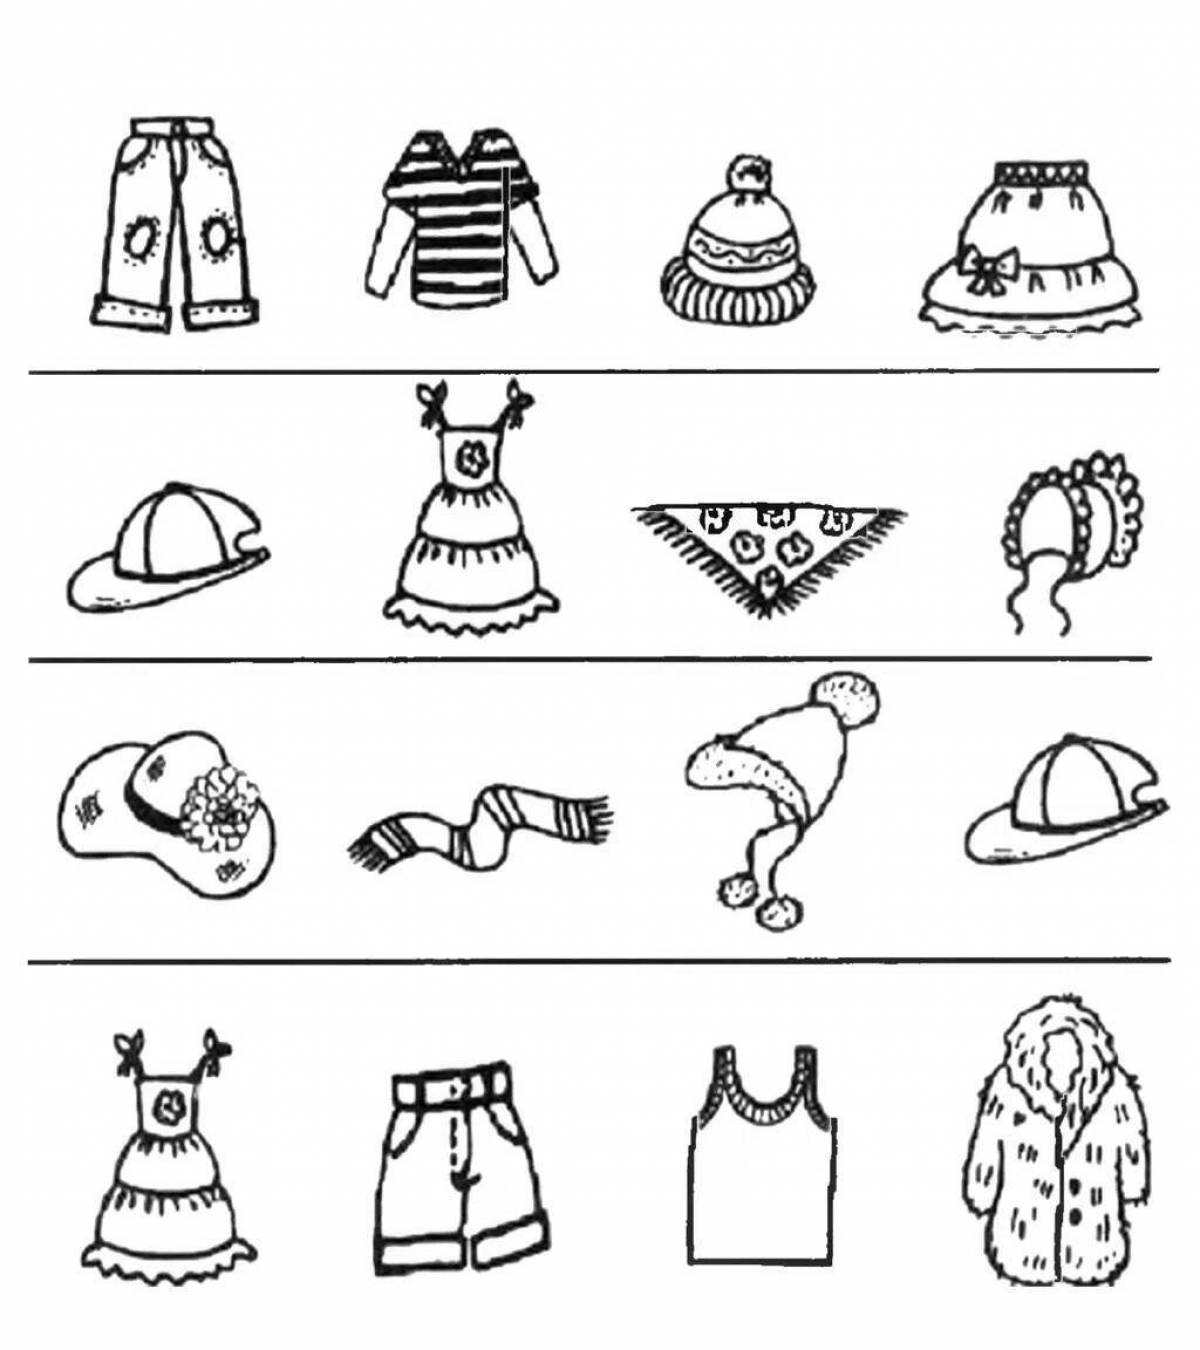 Coloring book funny clothes